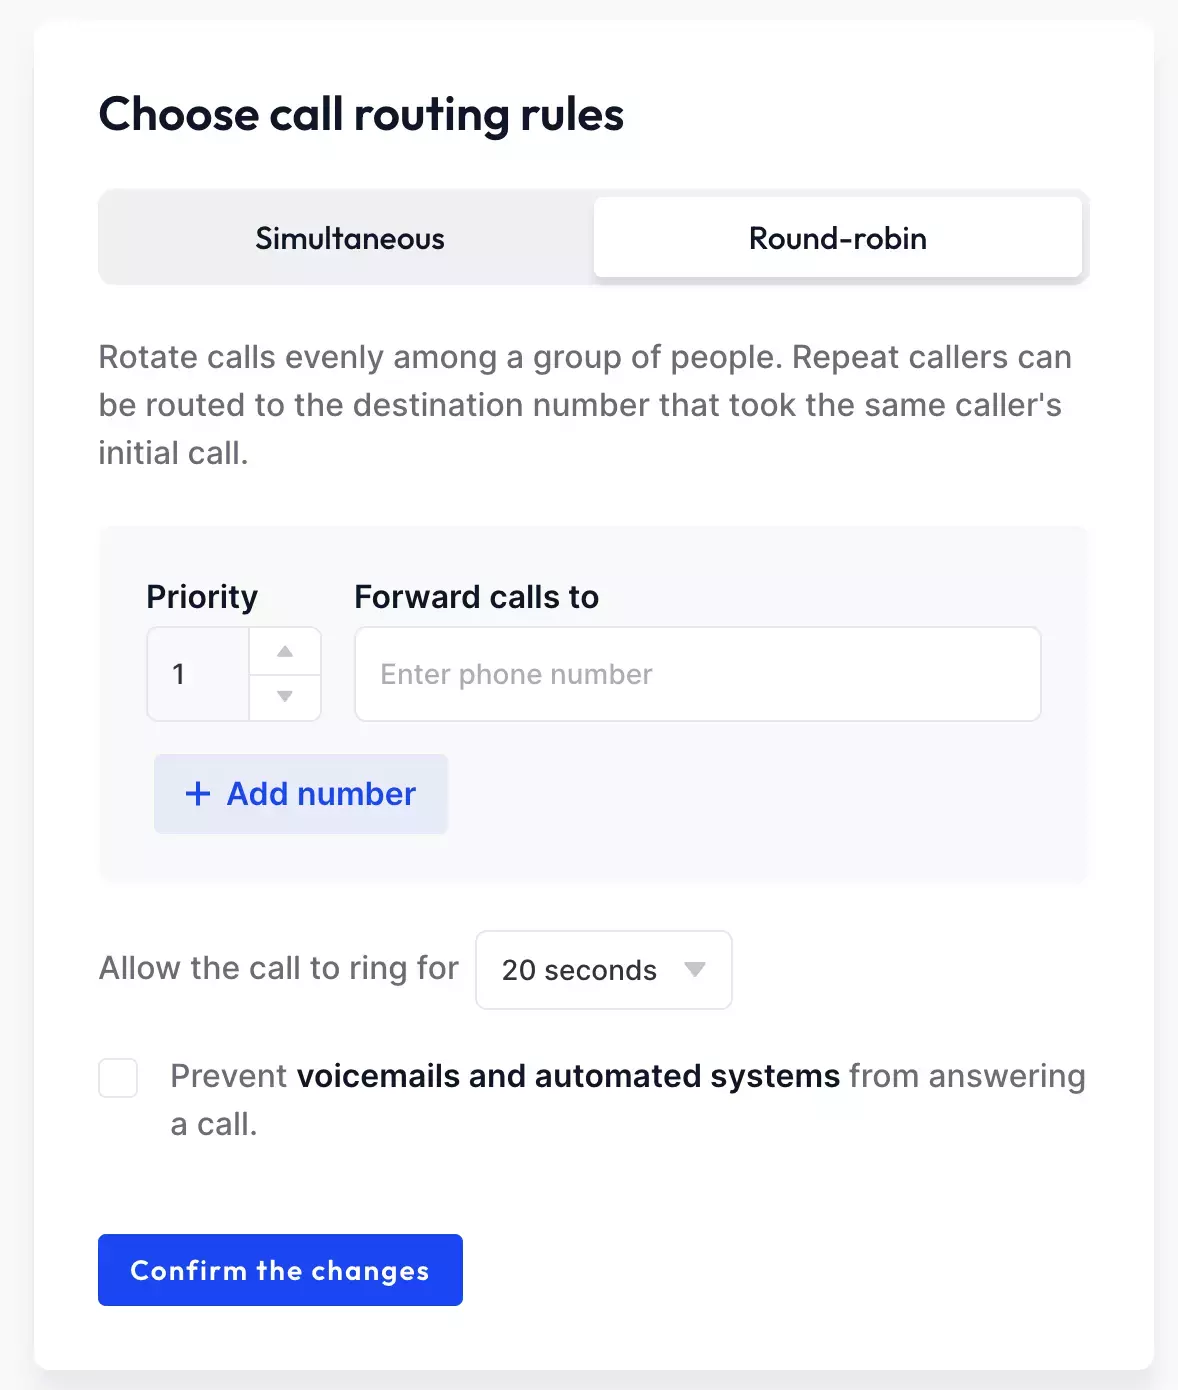 An image of Community Phone business landline round-robin call routing feature